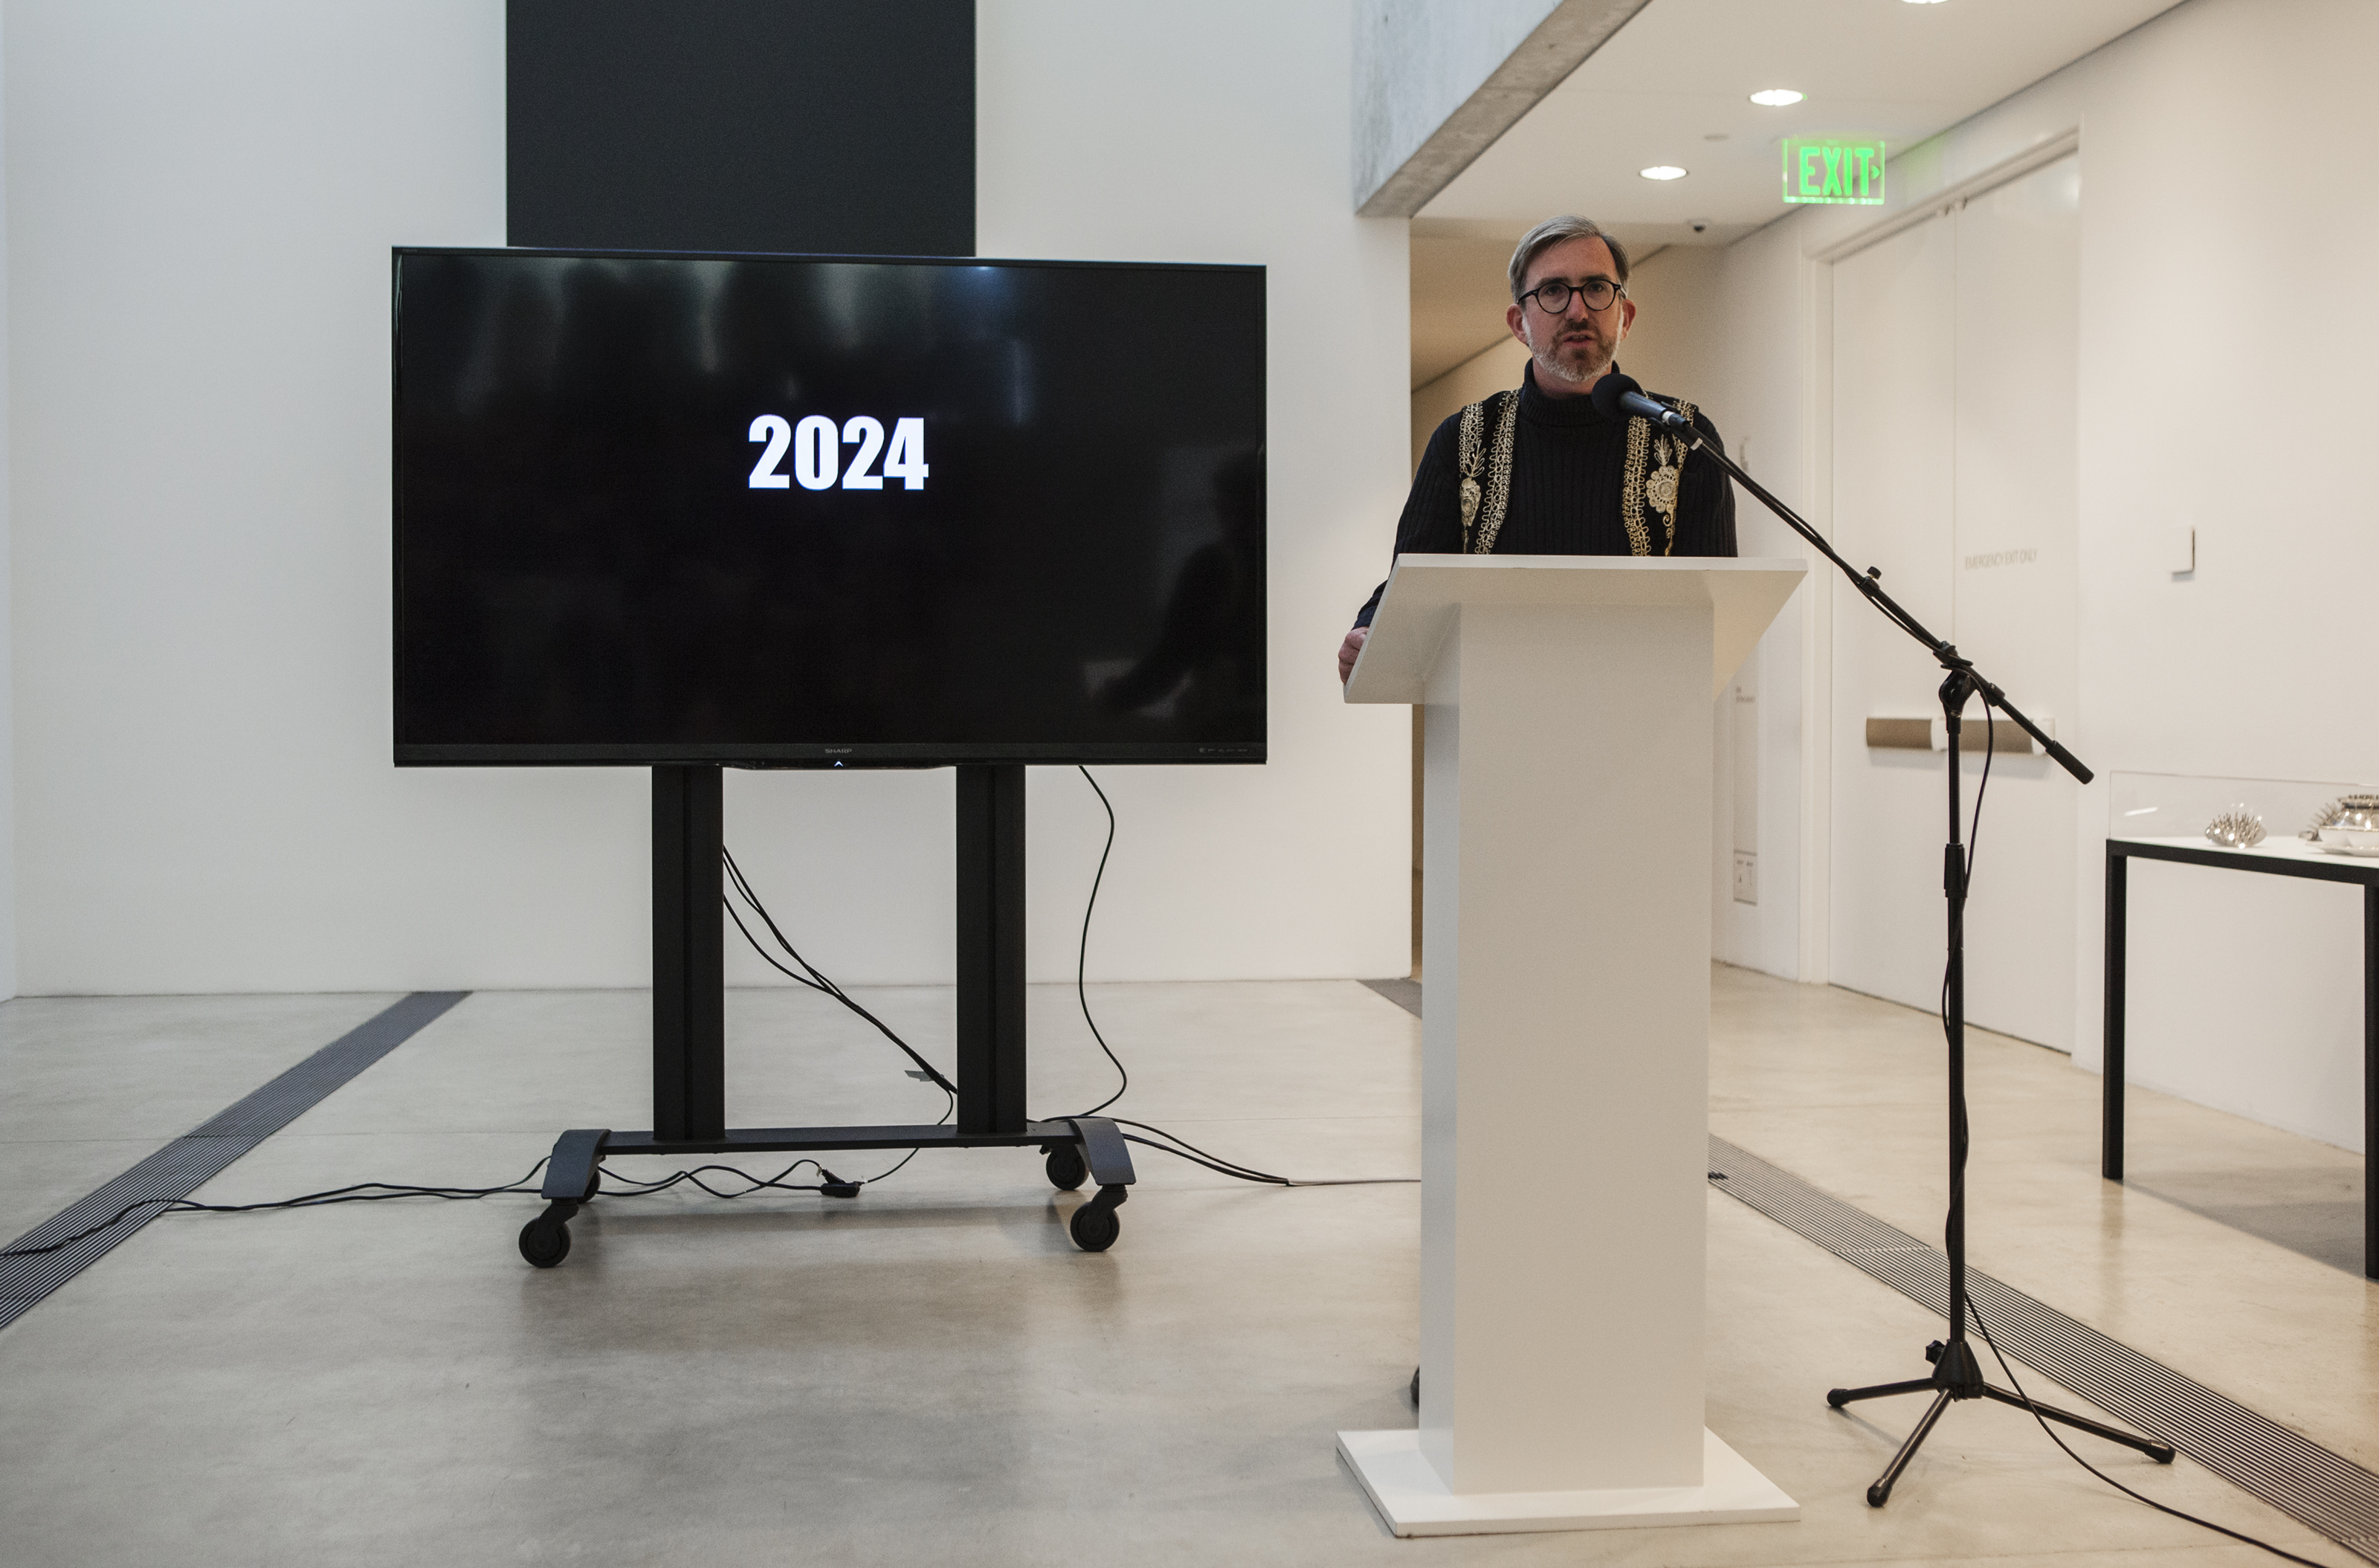 Michael Allen presenting during “Manifestos for a Future St. Louis,” presented as a part of Dwell In Other Futures: Art / Urbanism / Midwest. Pulitzer Arts Foundation, St. Louis. April 28, 2018. Photo by David Johnson